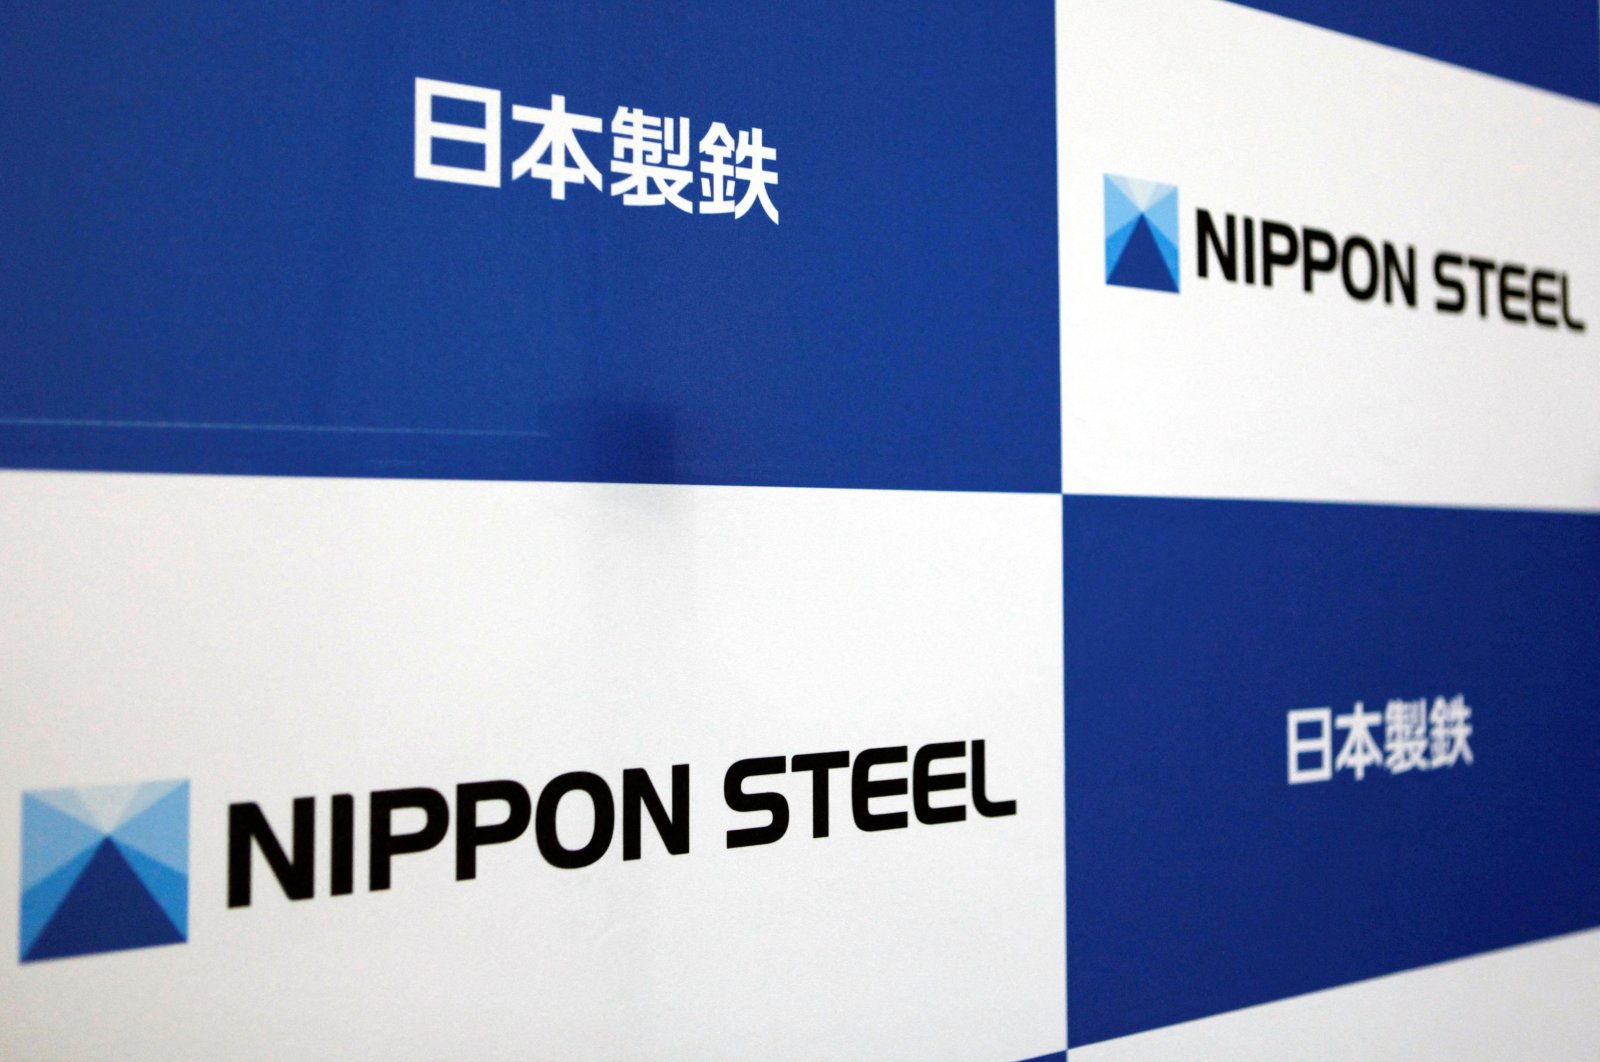 The logos of Nippon Steel Corp. are displayed at the company headquarters in Tokyo, Japan, March 18, 2019. (Reuters Photo)